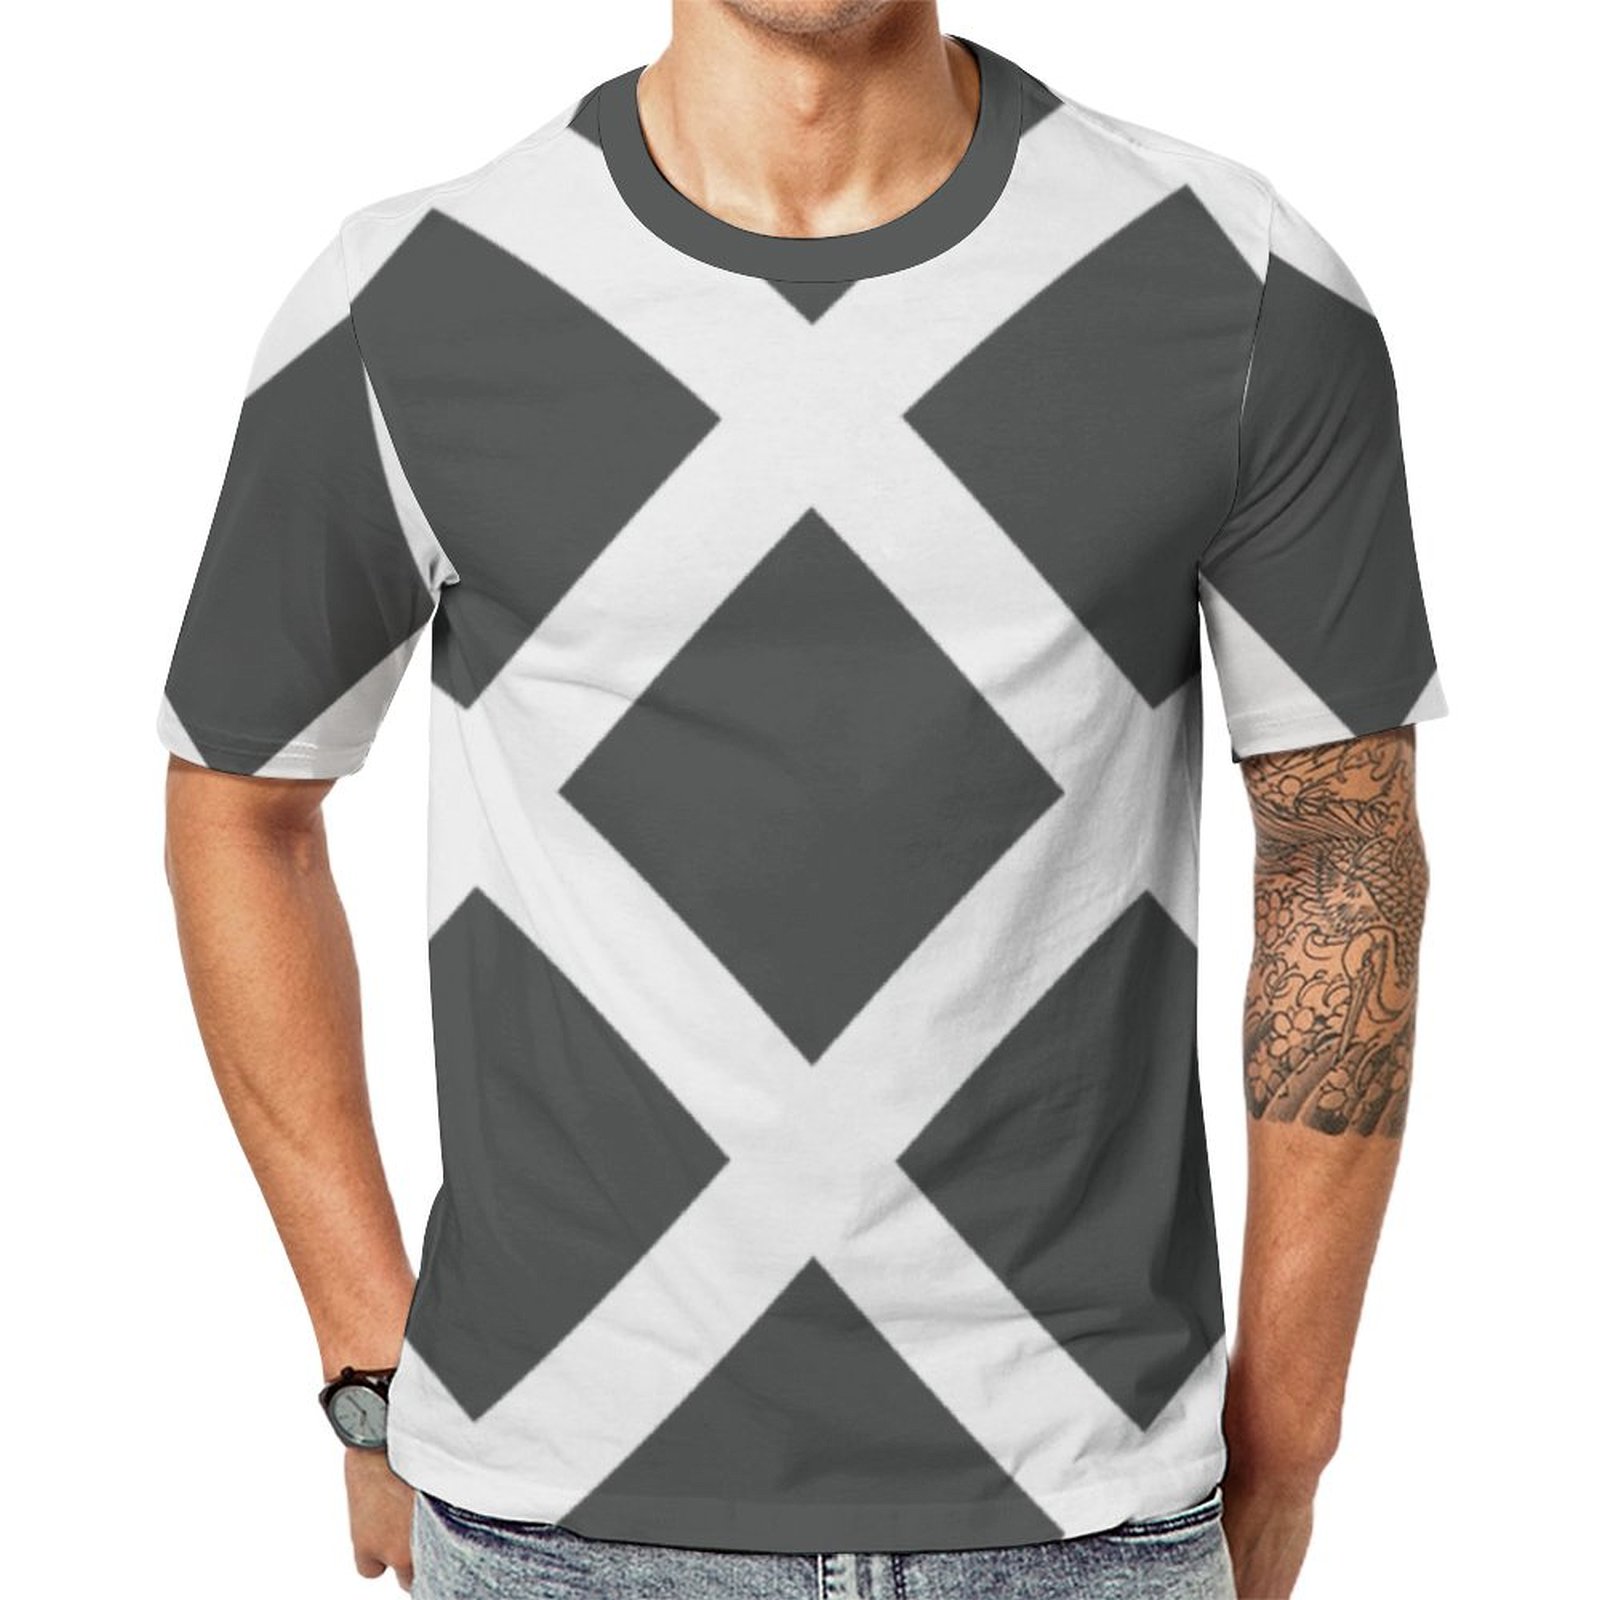 Charcoal Gray And White Criss Cross Stripes Short Sleeve Print Unisex Tshirt Summer Casual Tees for Men and Women Coolcoshirts